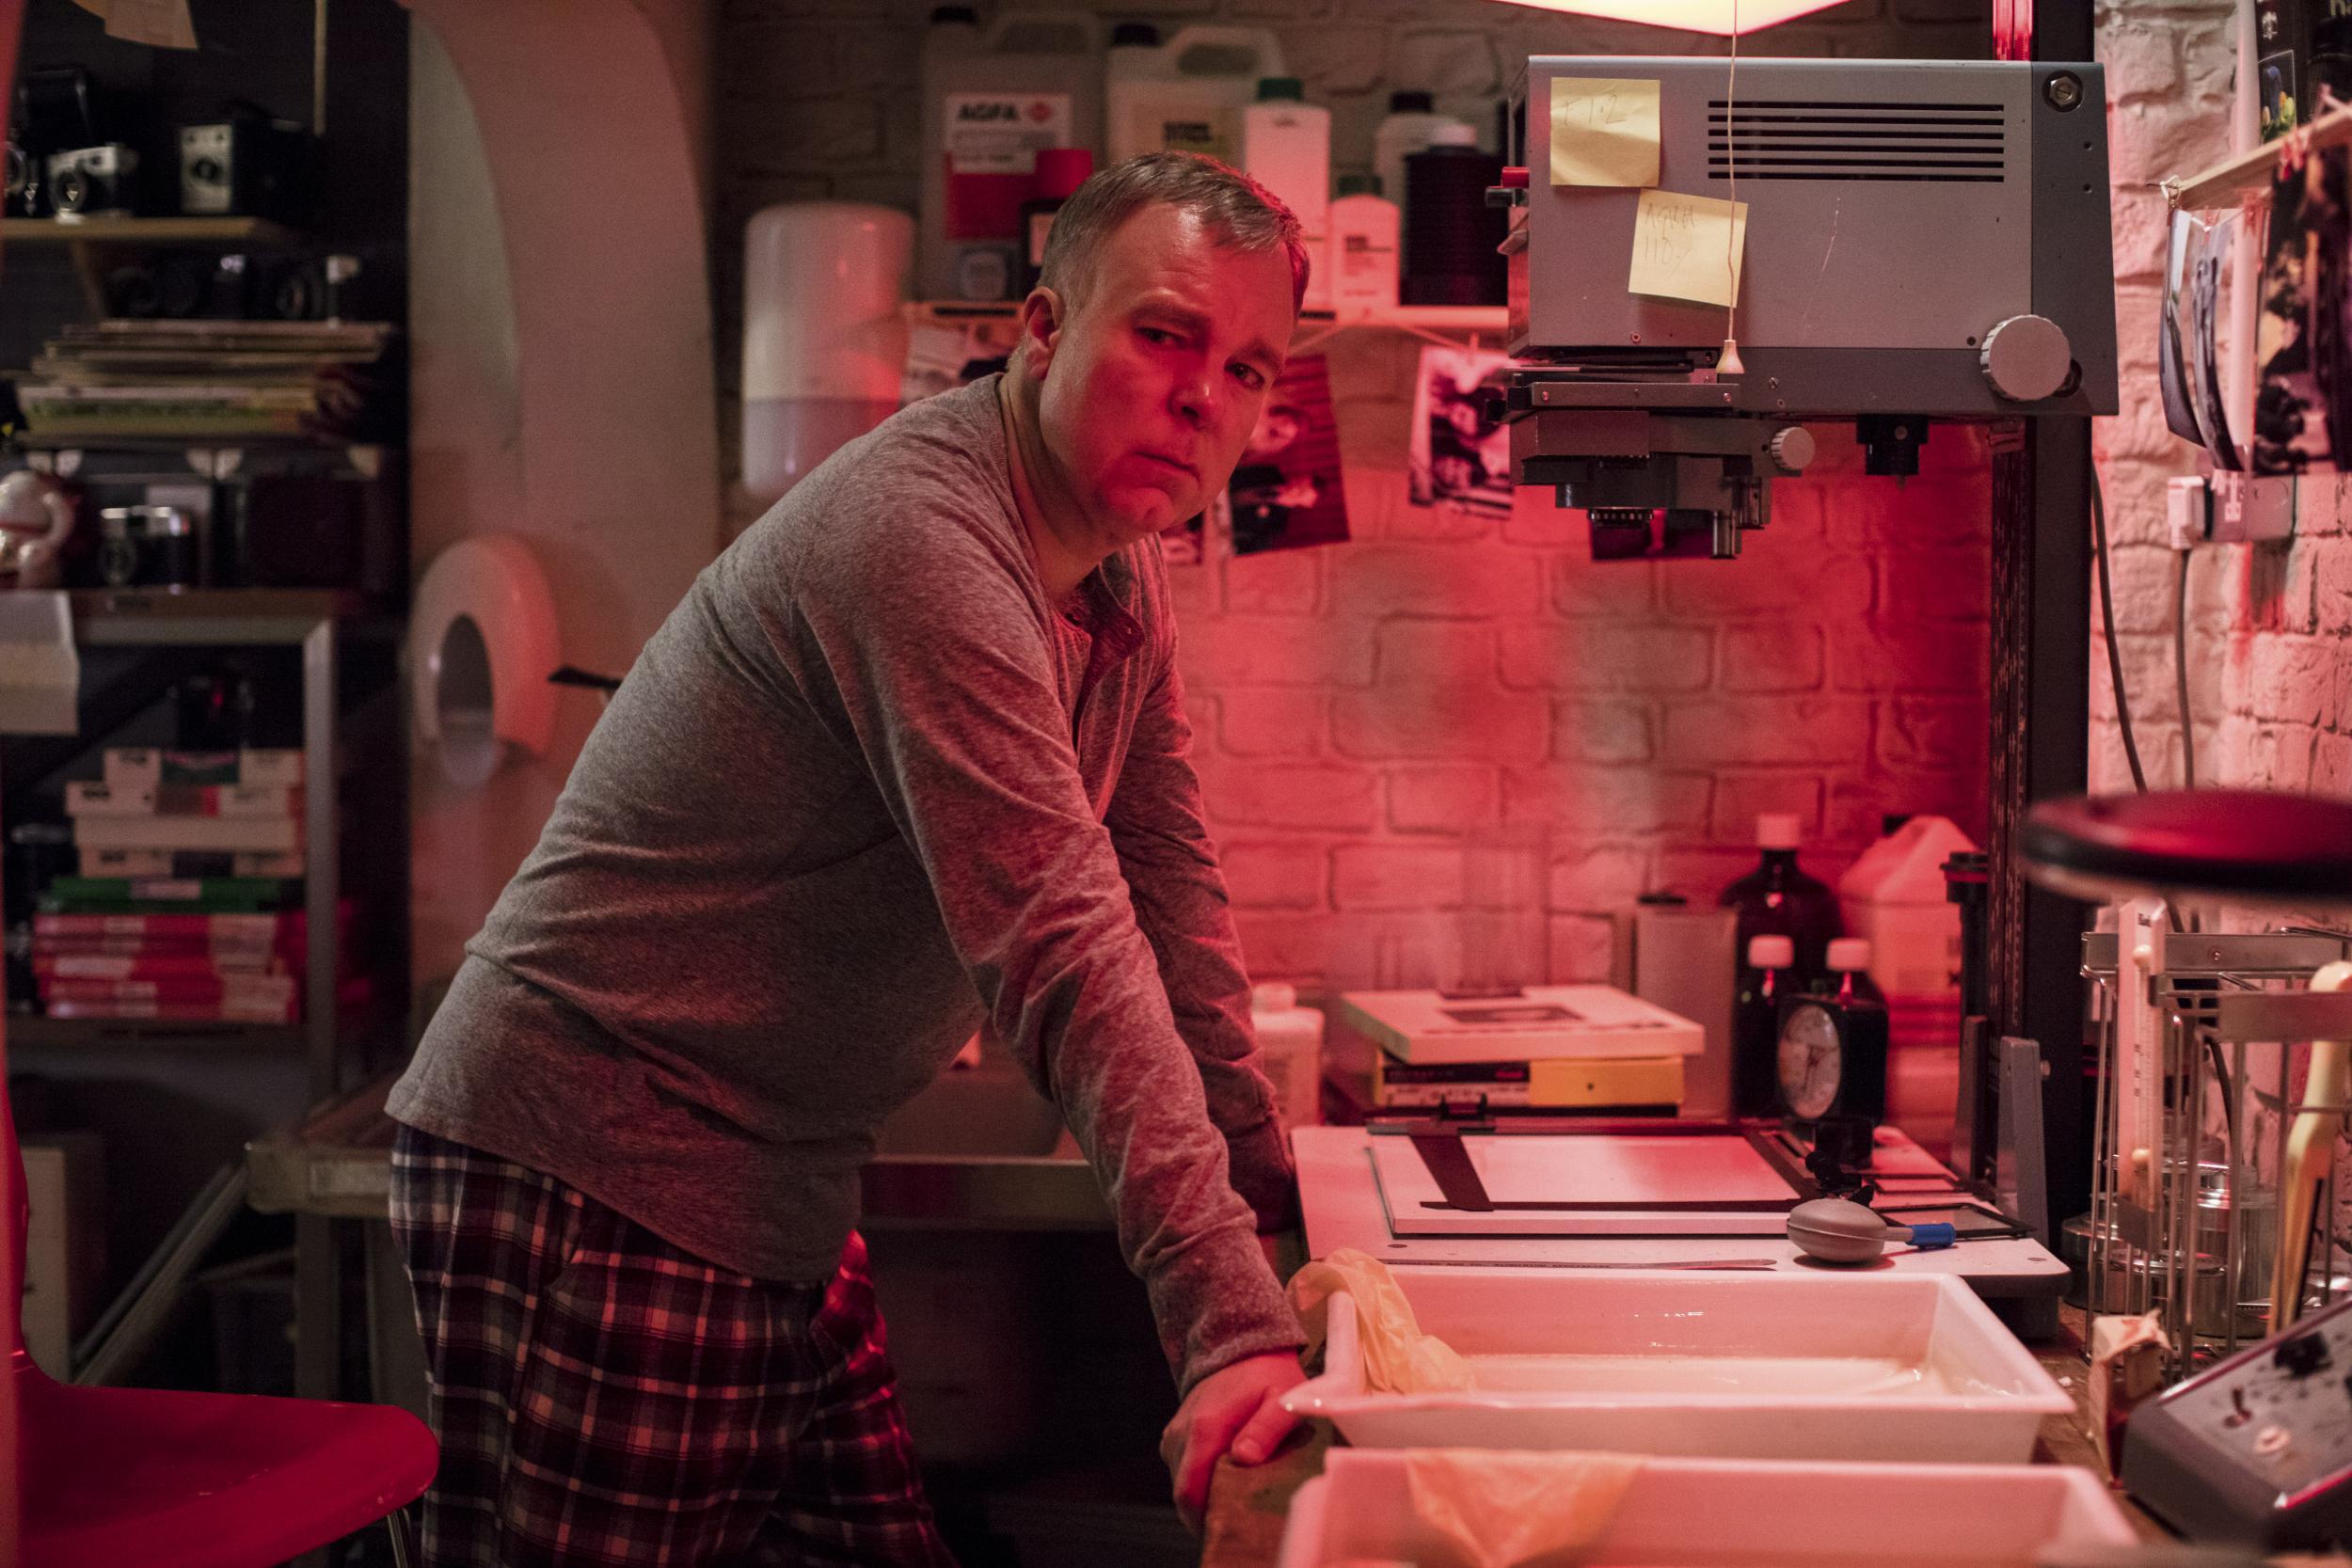 'Inside No. 9': Steve Pemberton as Adrian, developing some dark thoughts